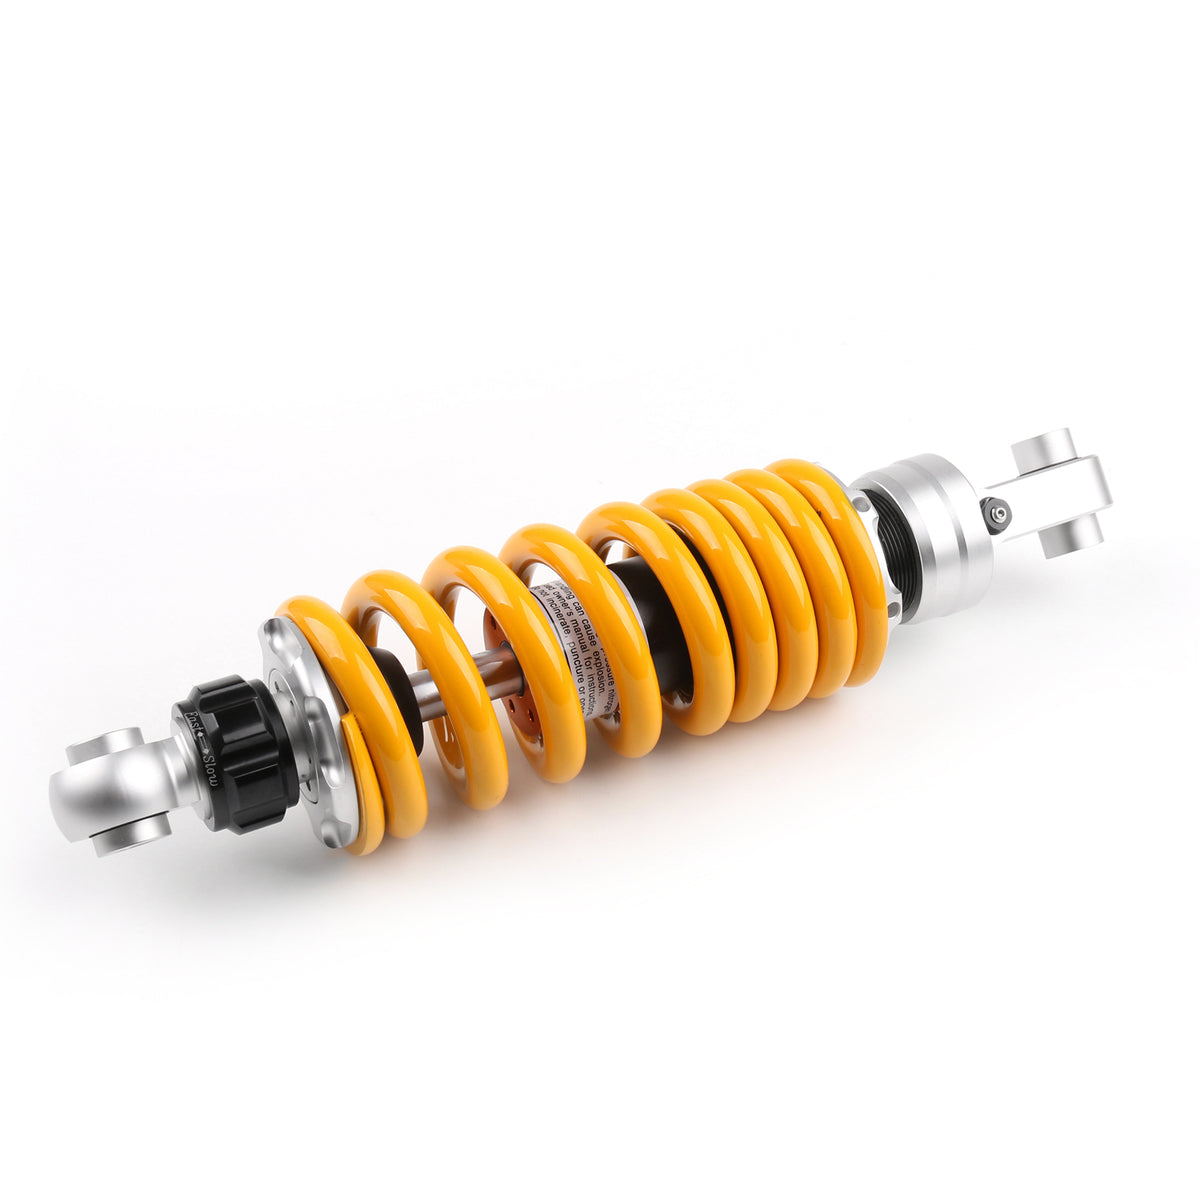 New 305mm 12" Rear Suspension Shock Absorber For HONDA NC 700 2012-2013 NC 750 X